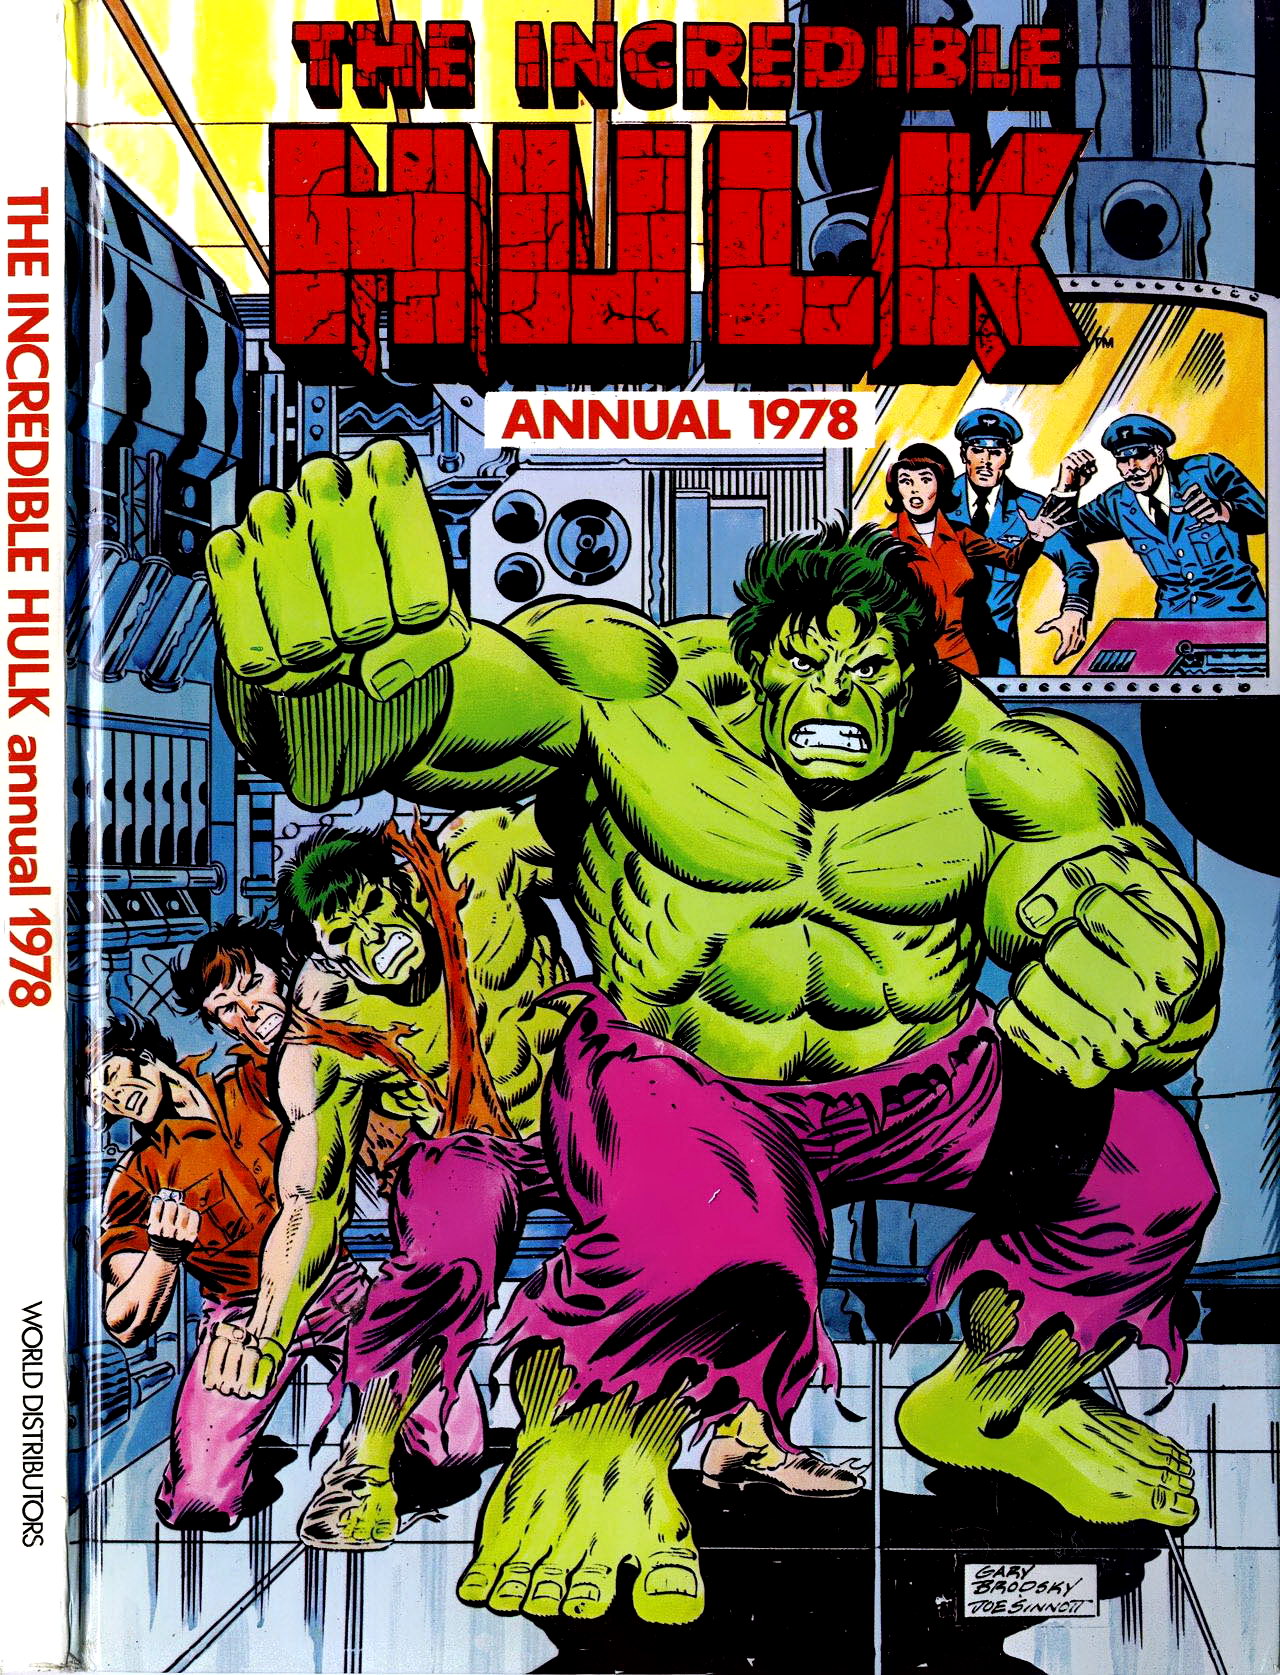 Read online Incredible Hulk Annual comic -  Issue #1978 - 1